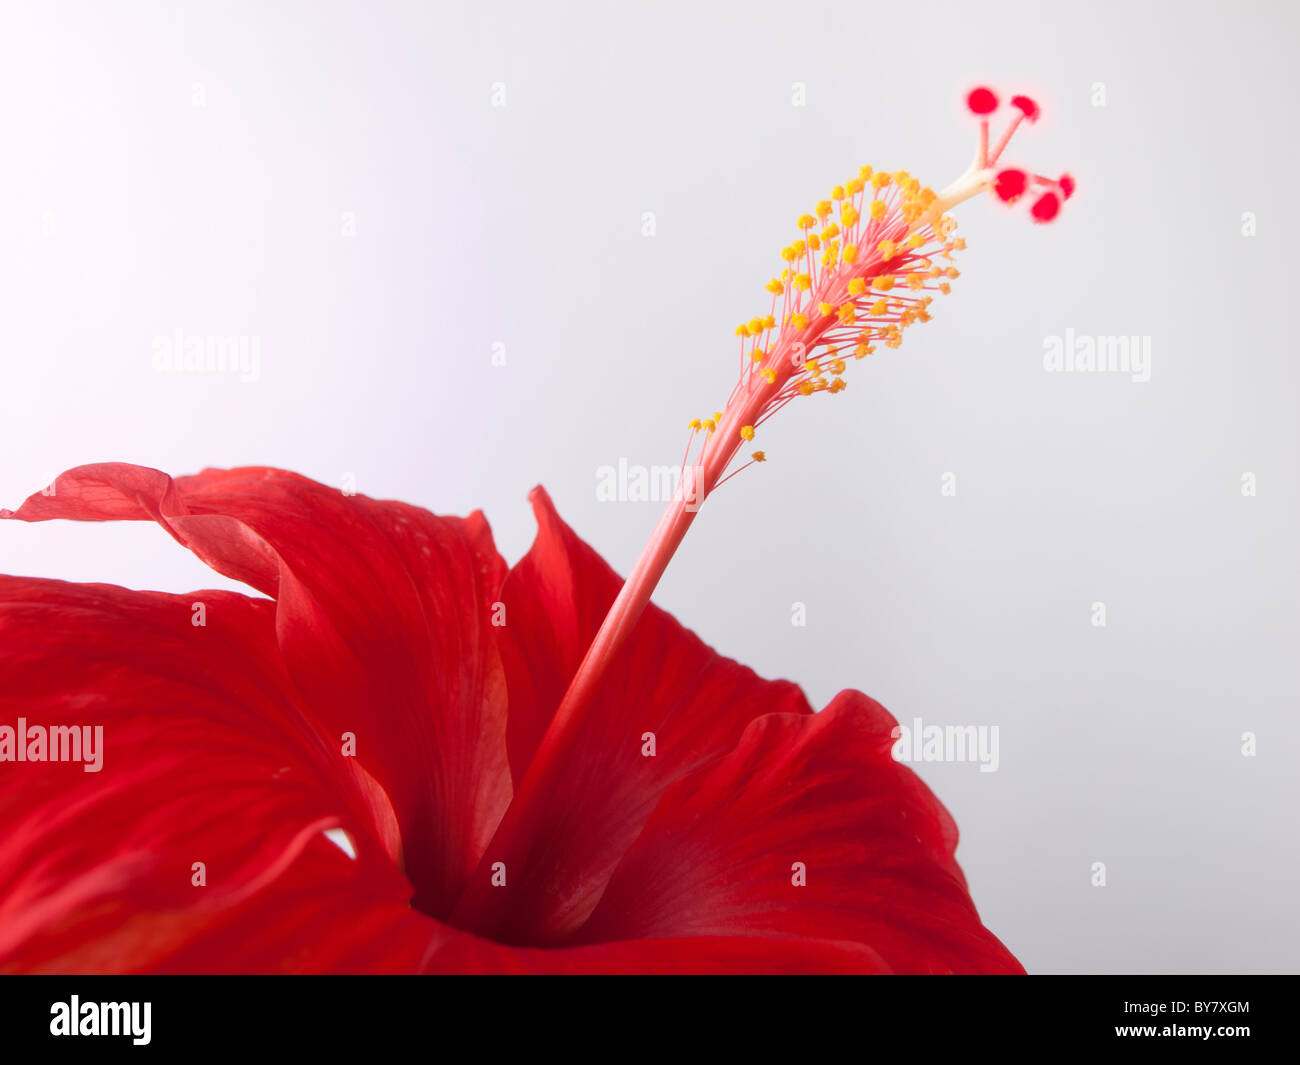 A red hibiscus flower on a white background Stock Photo